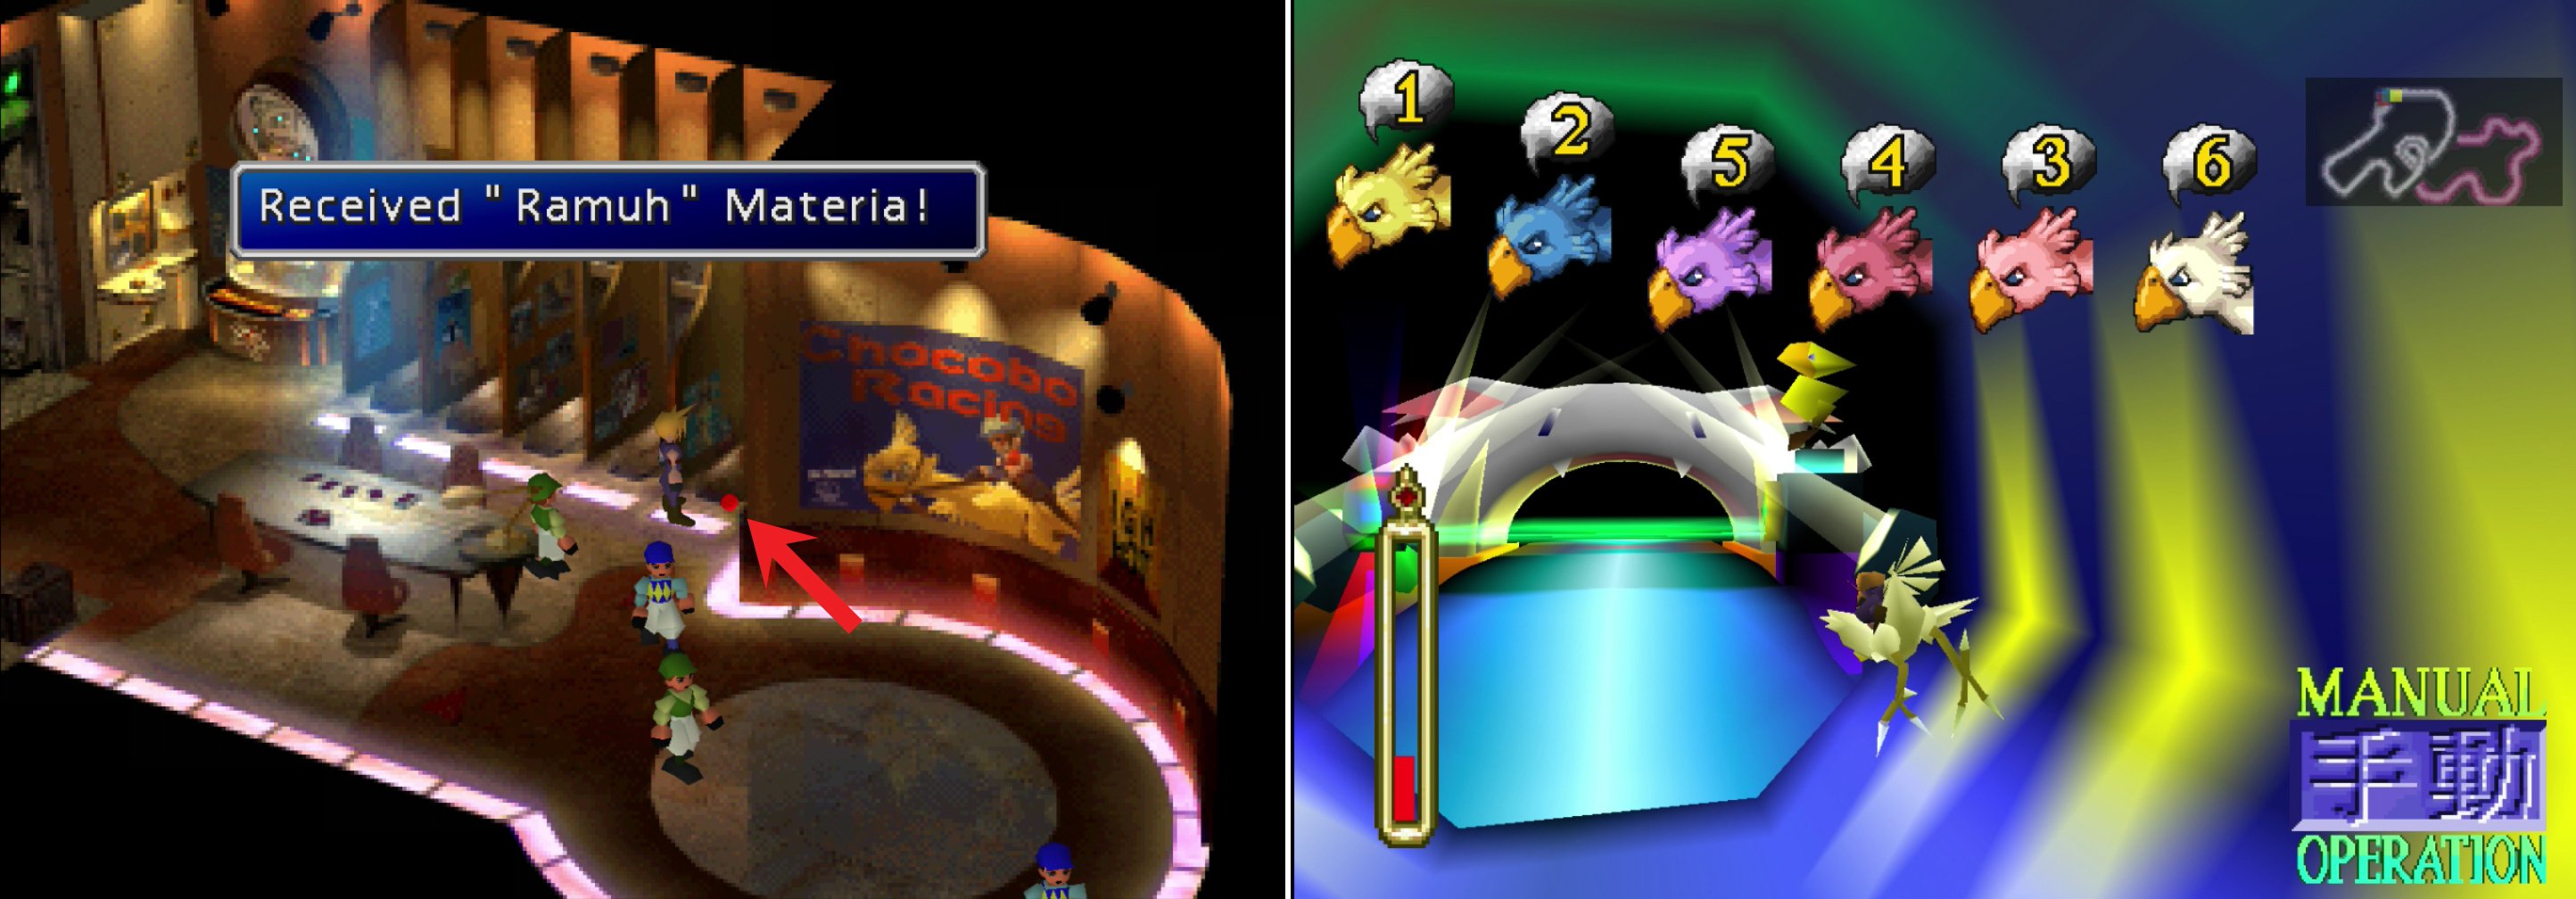 Be sure to grab the Ramuh Materia from the jockey waiting room; you'll never get another chance to pick it up (left). Win your freedom by being victorious in the Chocobo races (right).